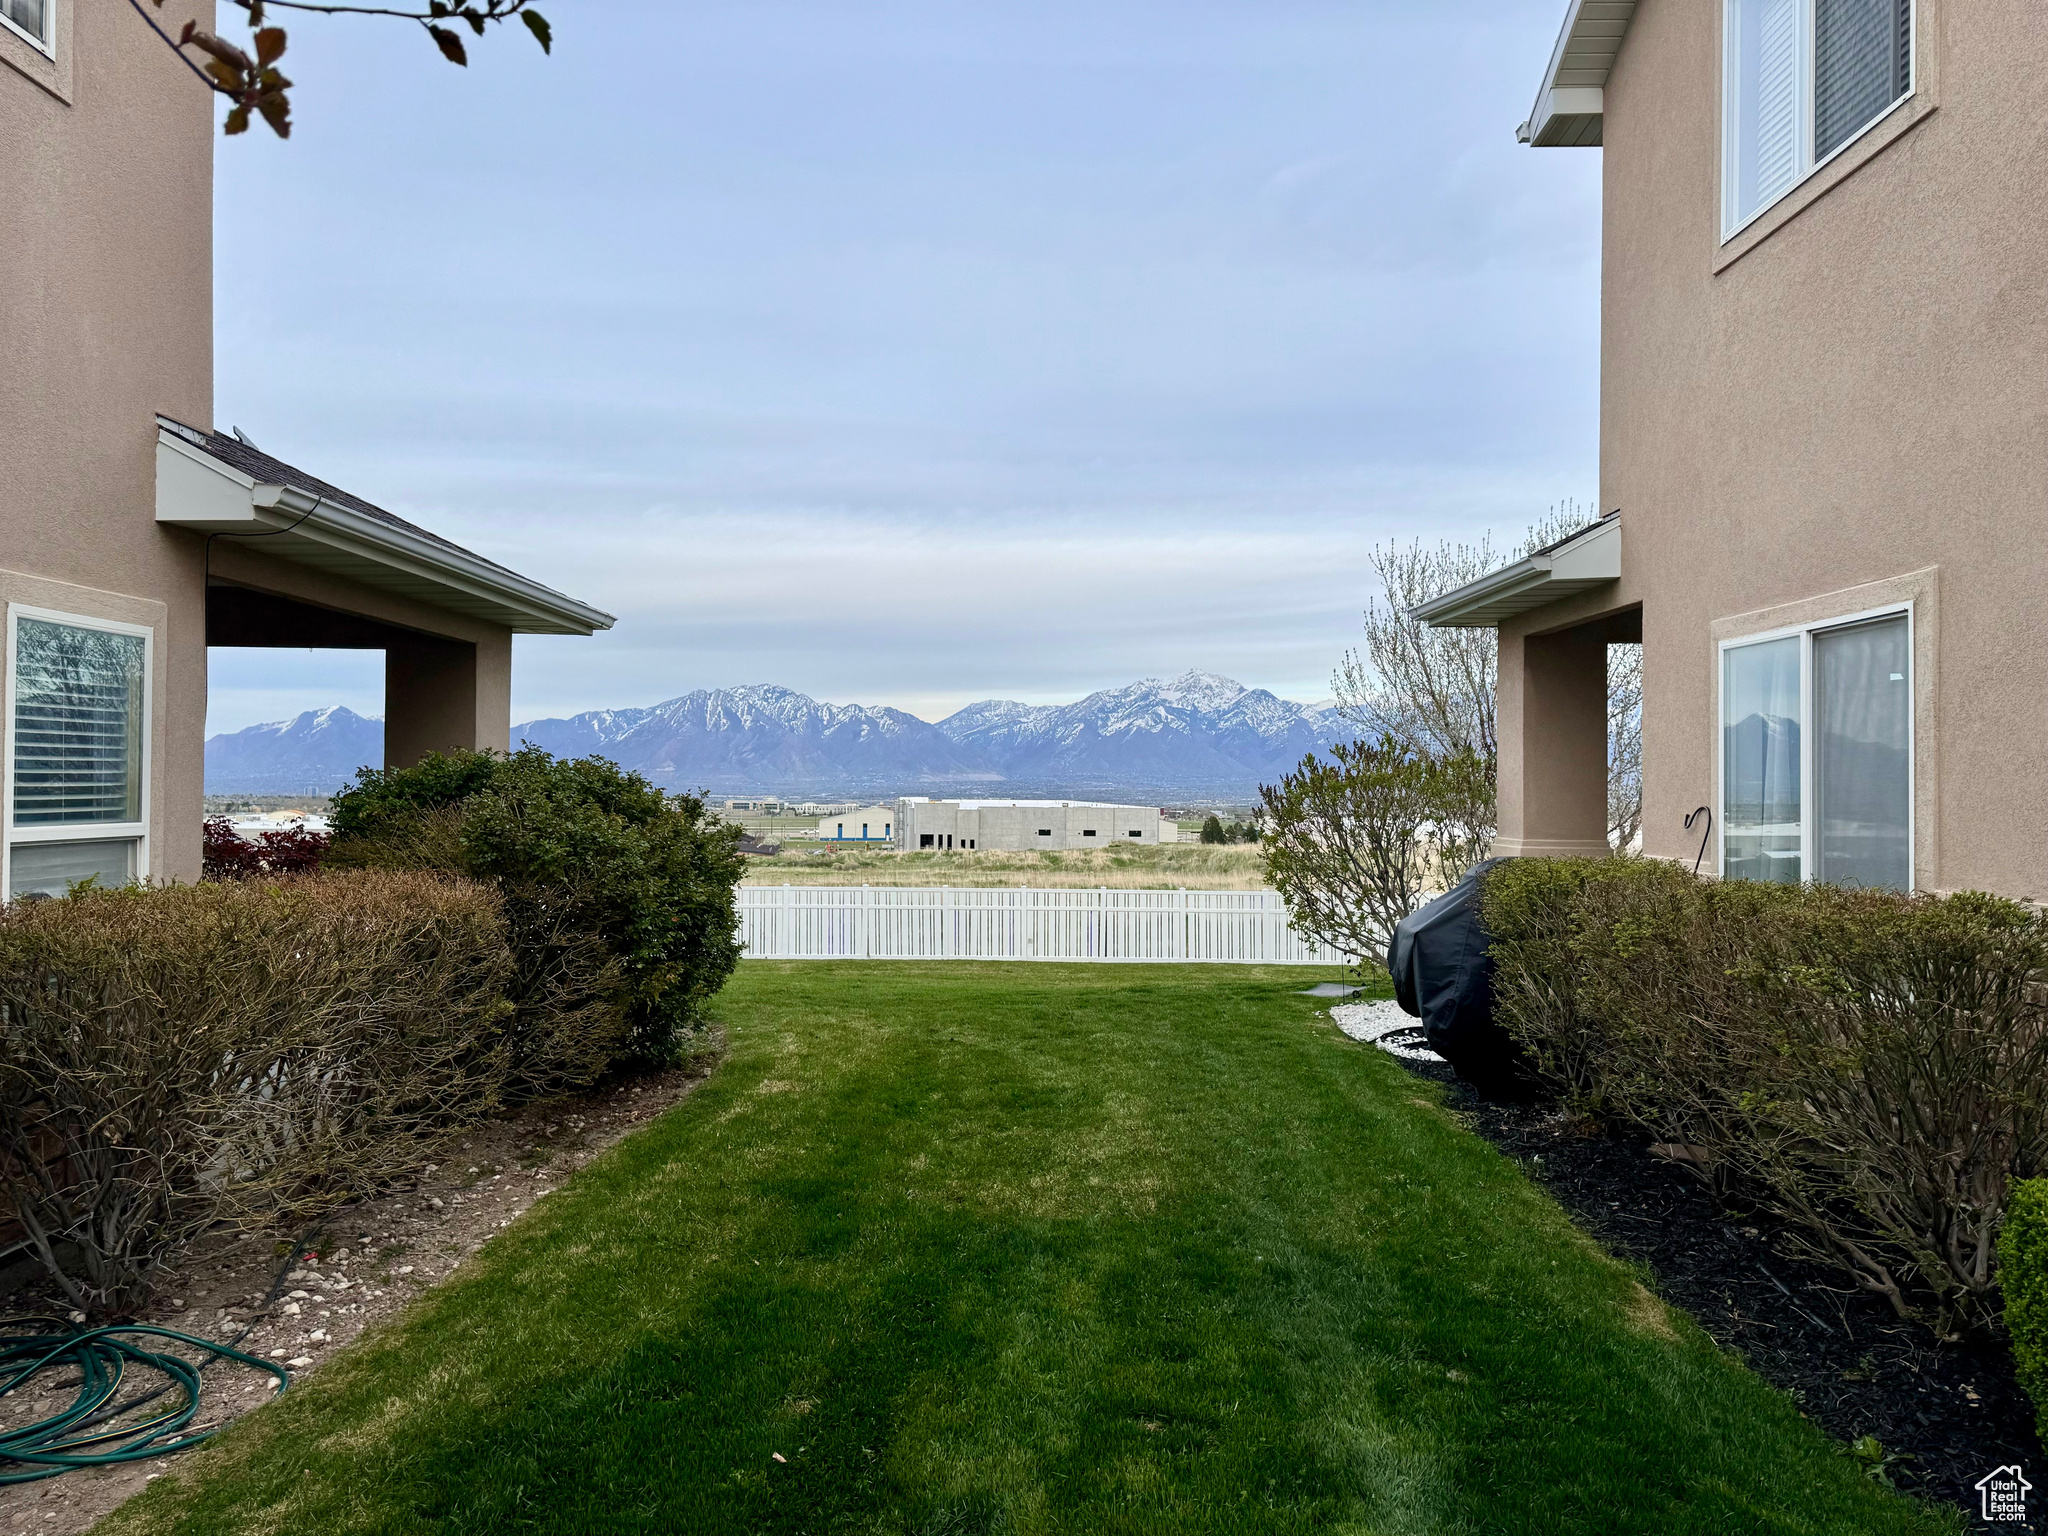 7371 S BRITTANY TOWN W, West Jordan, Utah 84084, 3 Bedrooms Bedrooms, 12 Rooms Rooms,2 BathroomsBathrooms,Residential,For sale,BRITTANY TOWN,1994714